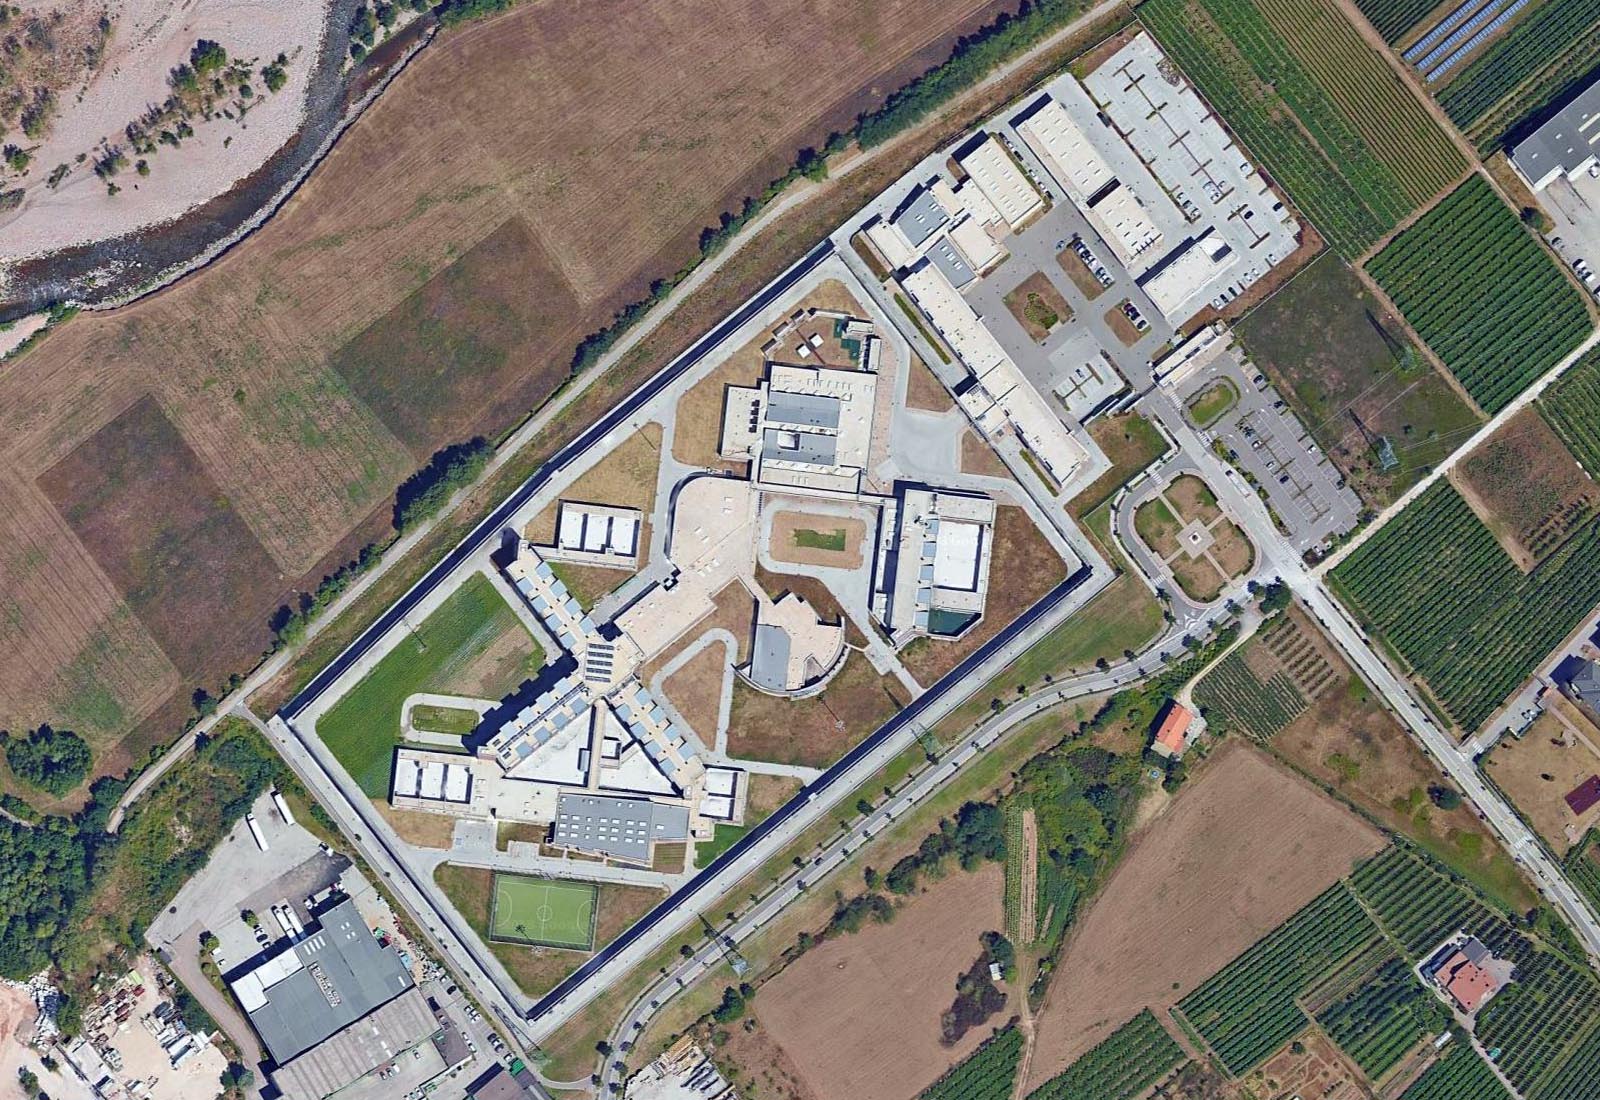 Prison building of Trento - Zenithal aerial view